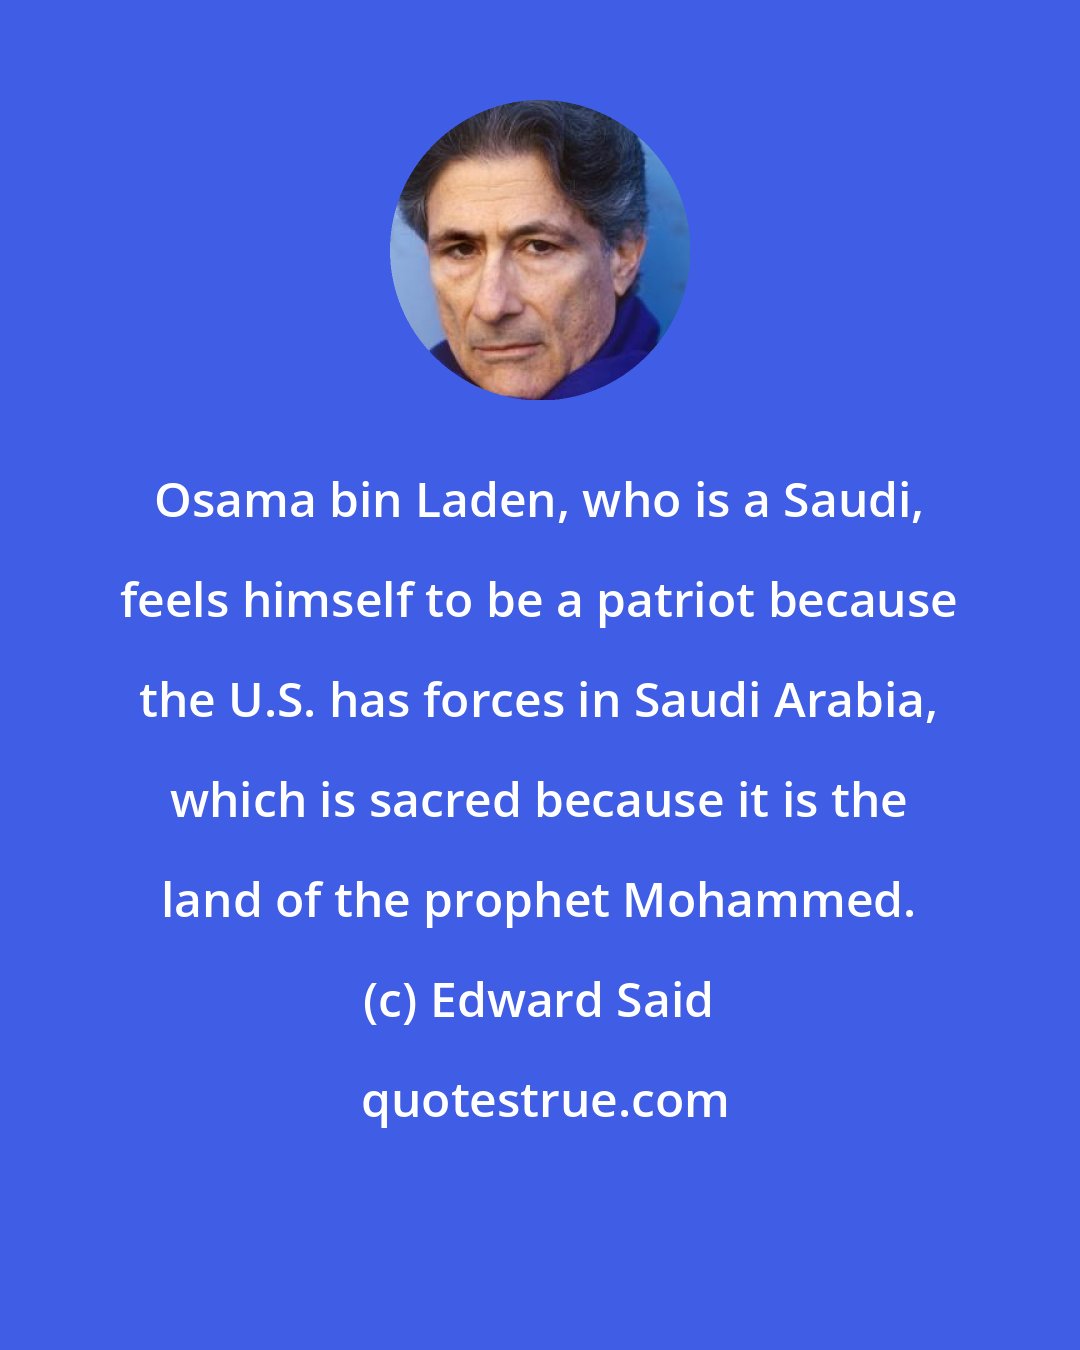 Edward Said: Osama bin Laden, who is a Saudi, feels himself to be a patriot because the U.S. has forces in Saudi Arabia, which is sacred because it is the land of the prophet Mohammed.